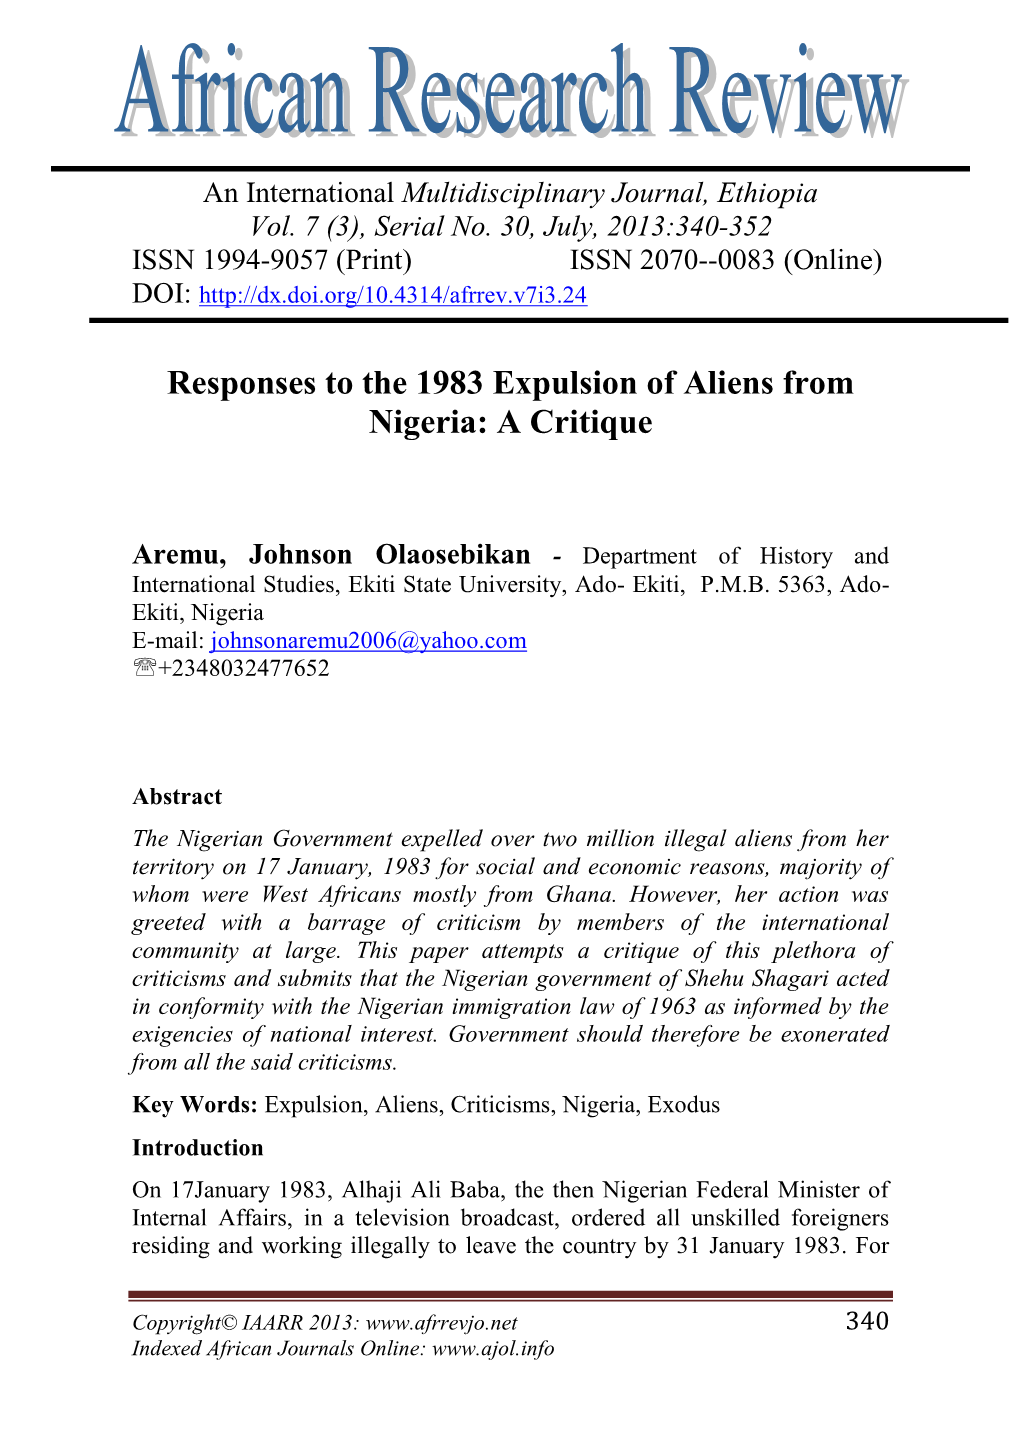 Responses to the 1983 Expulsion of Aliens from Nigeria: a Critique